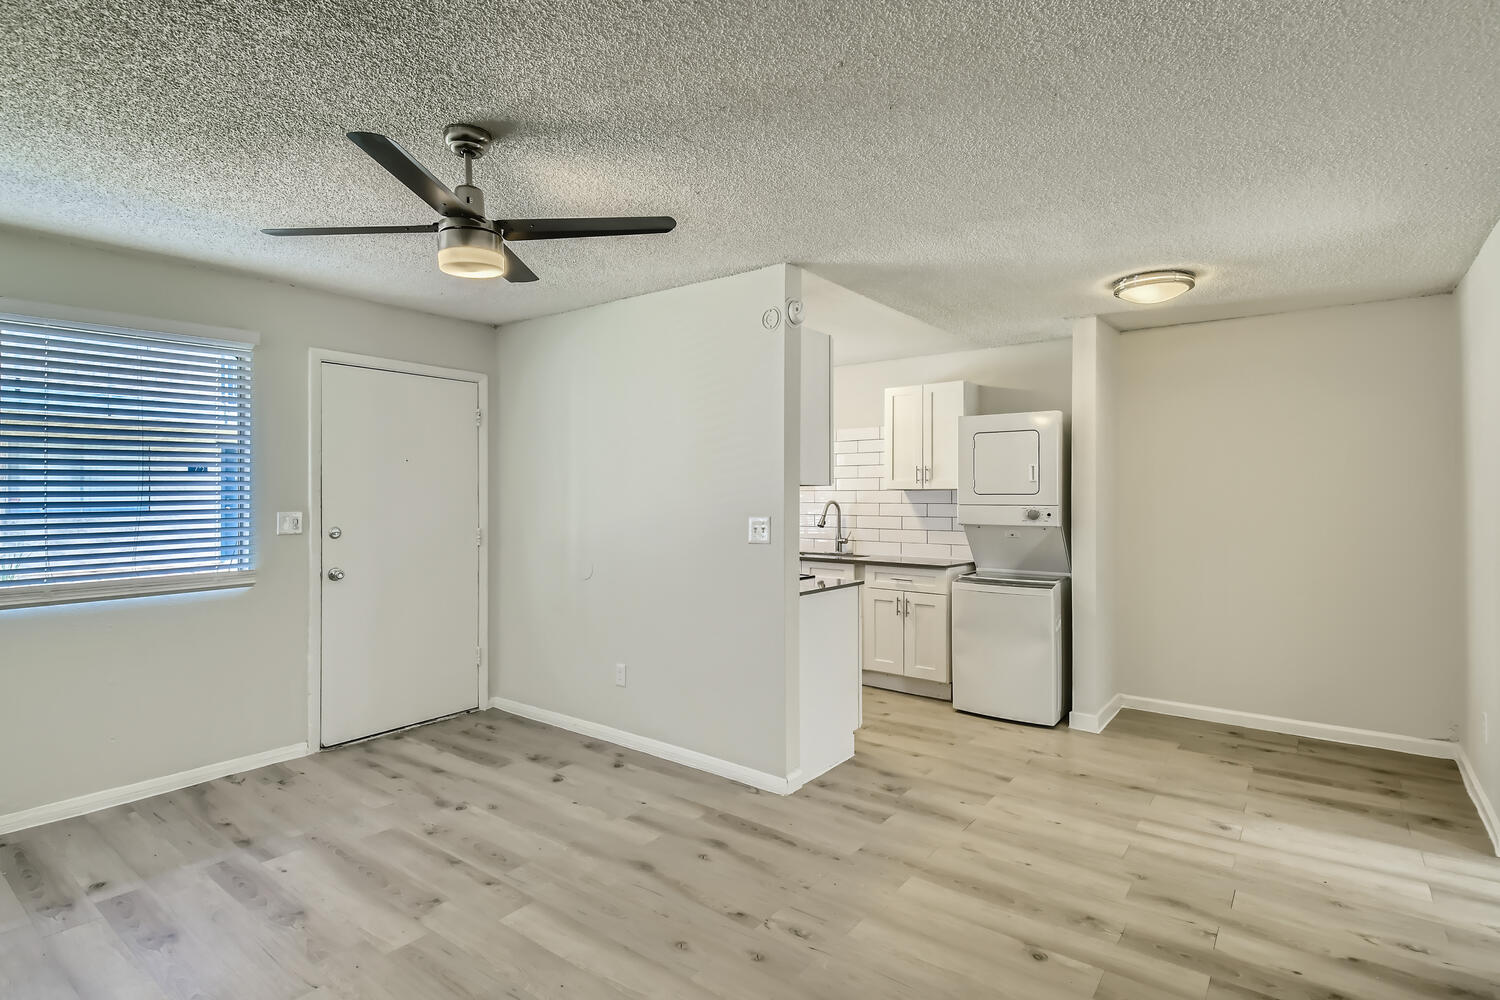 A remodeled apartment living room and kitchen with wood-style flooring at Rise at the Palms.